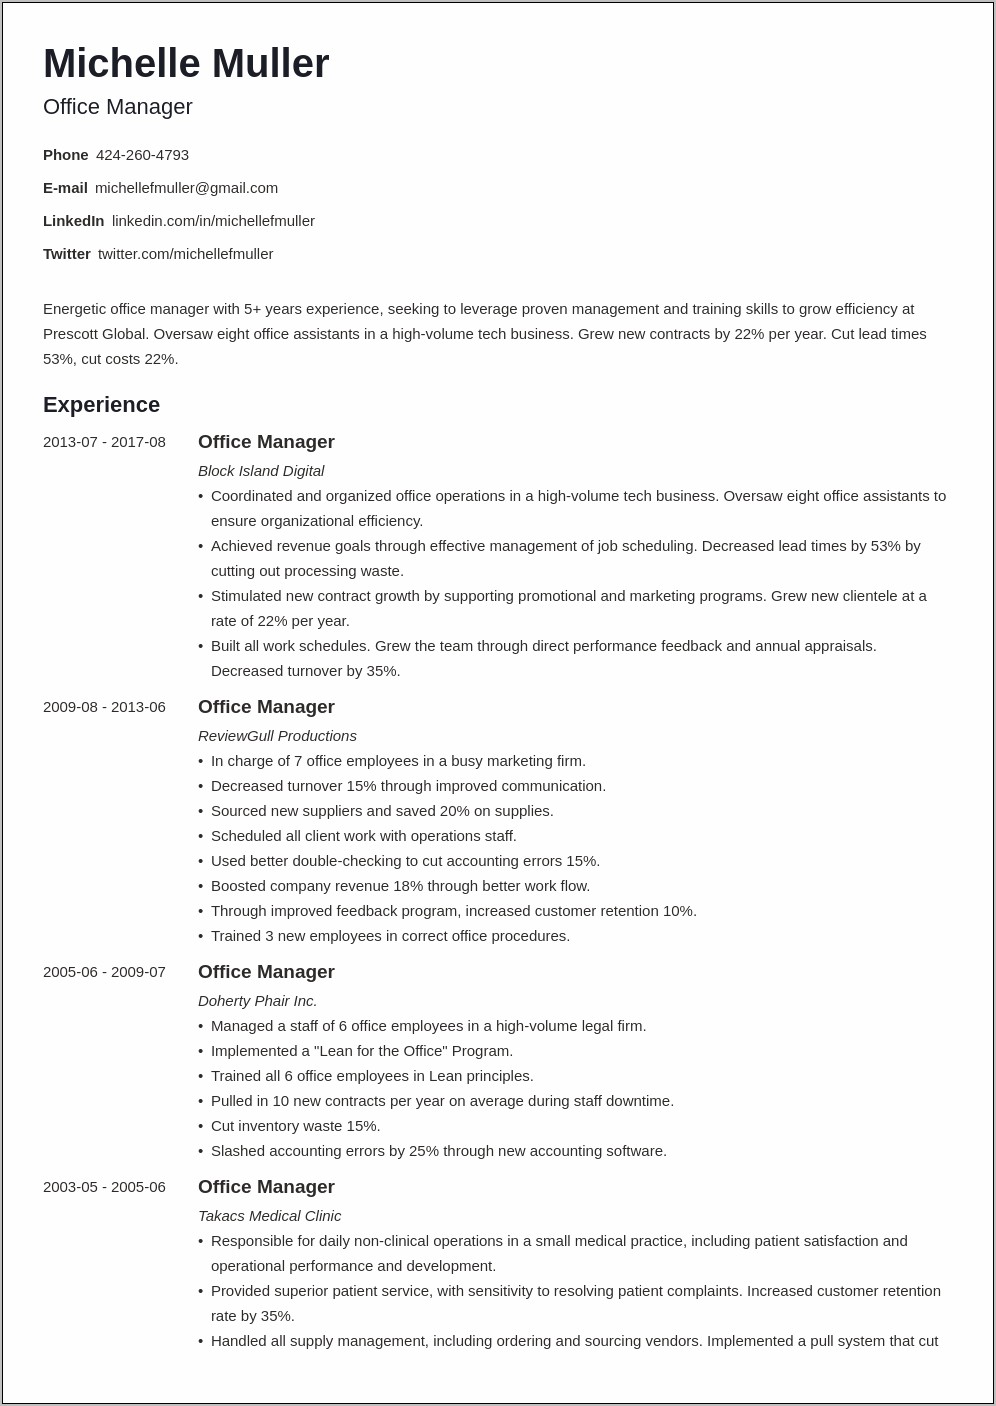 Resume Work Experience Same Company Moved